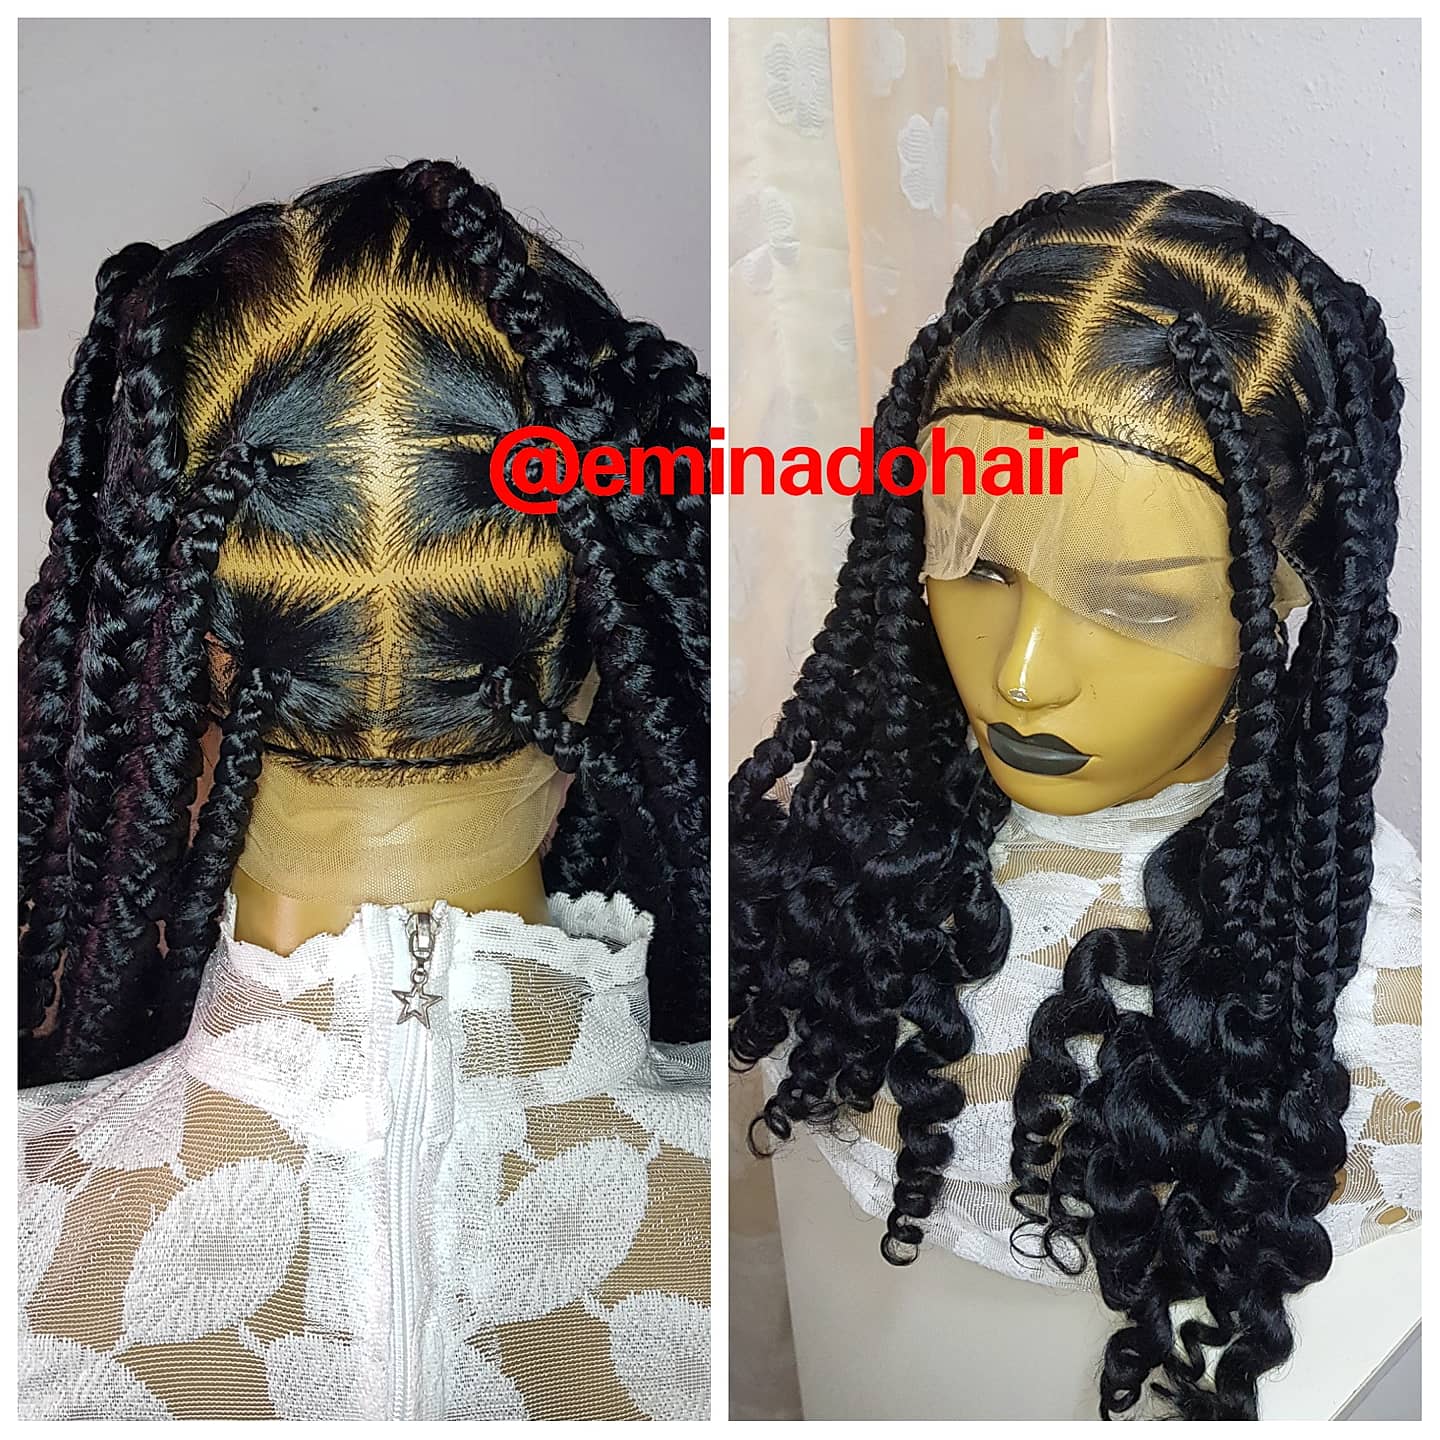 Full Lace Wig Coi Leray Knotless Braid – KhennyEsther Wigs